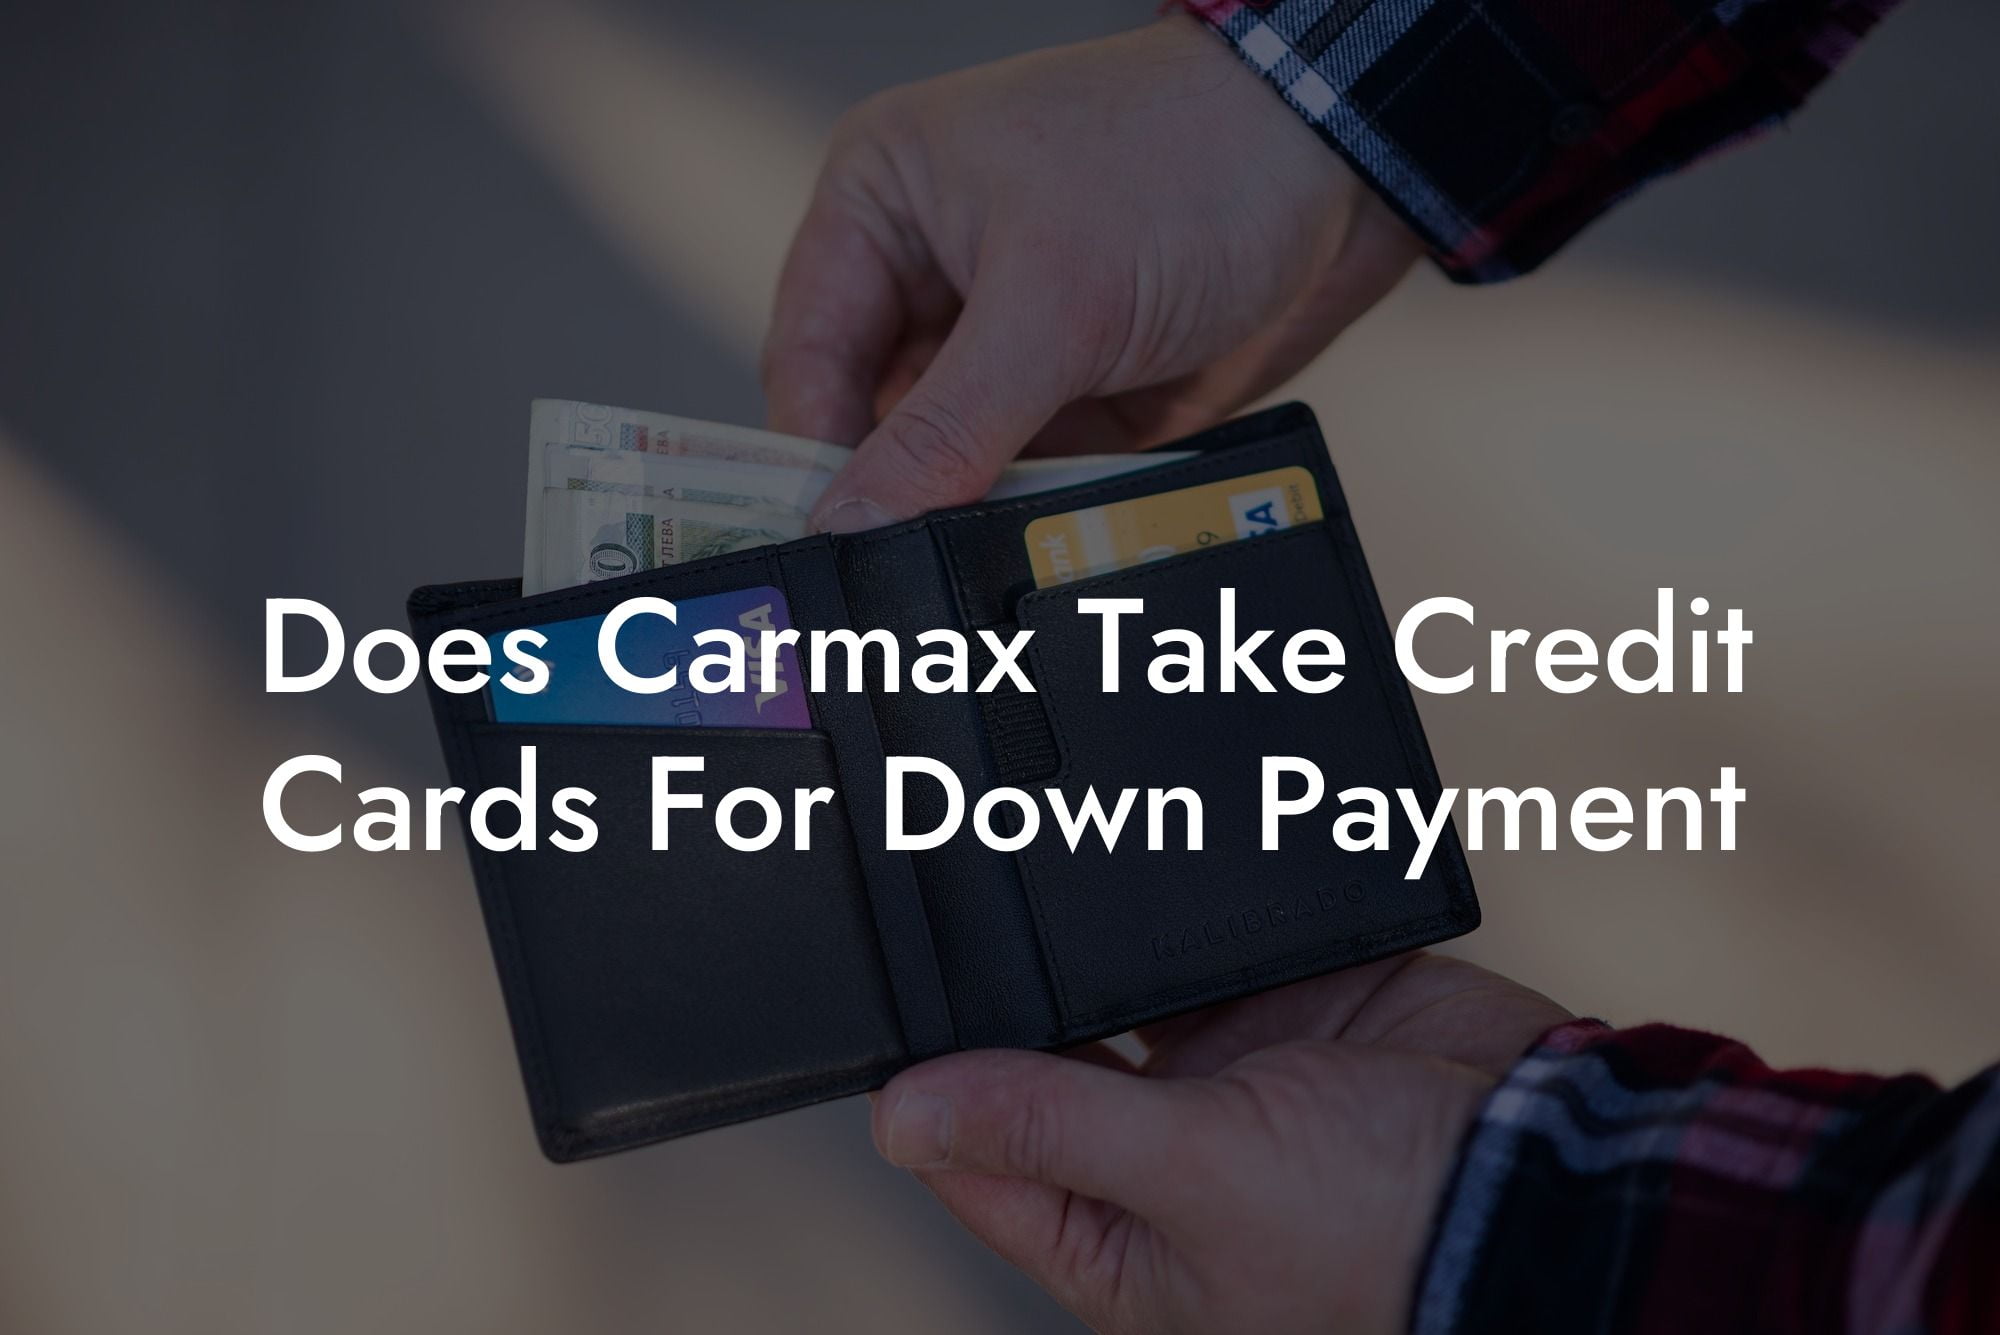 Does Carmax Take Credit Cards For Down Payment